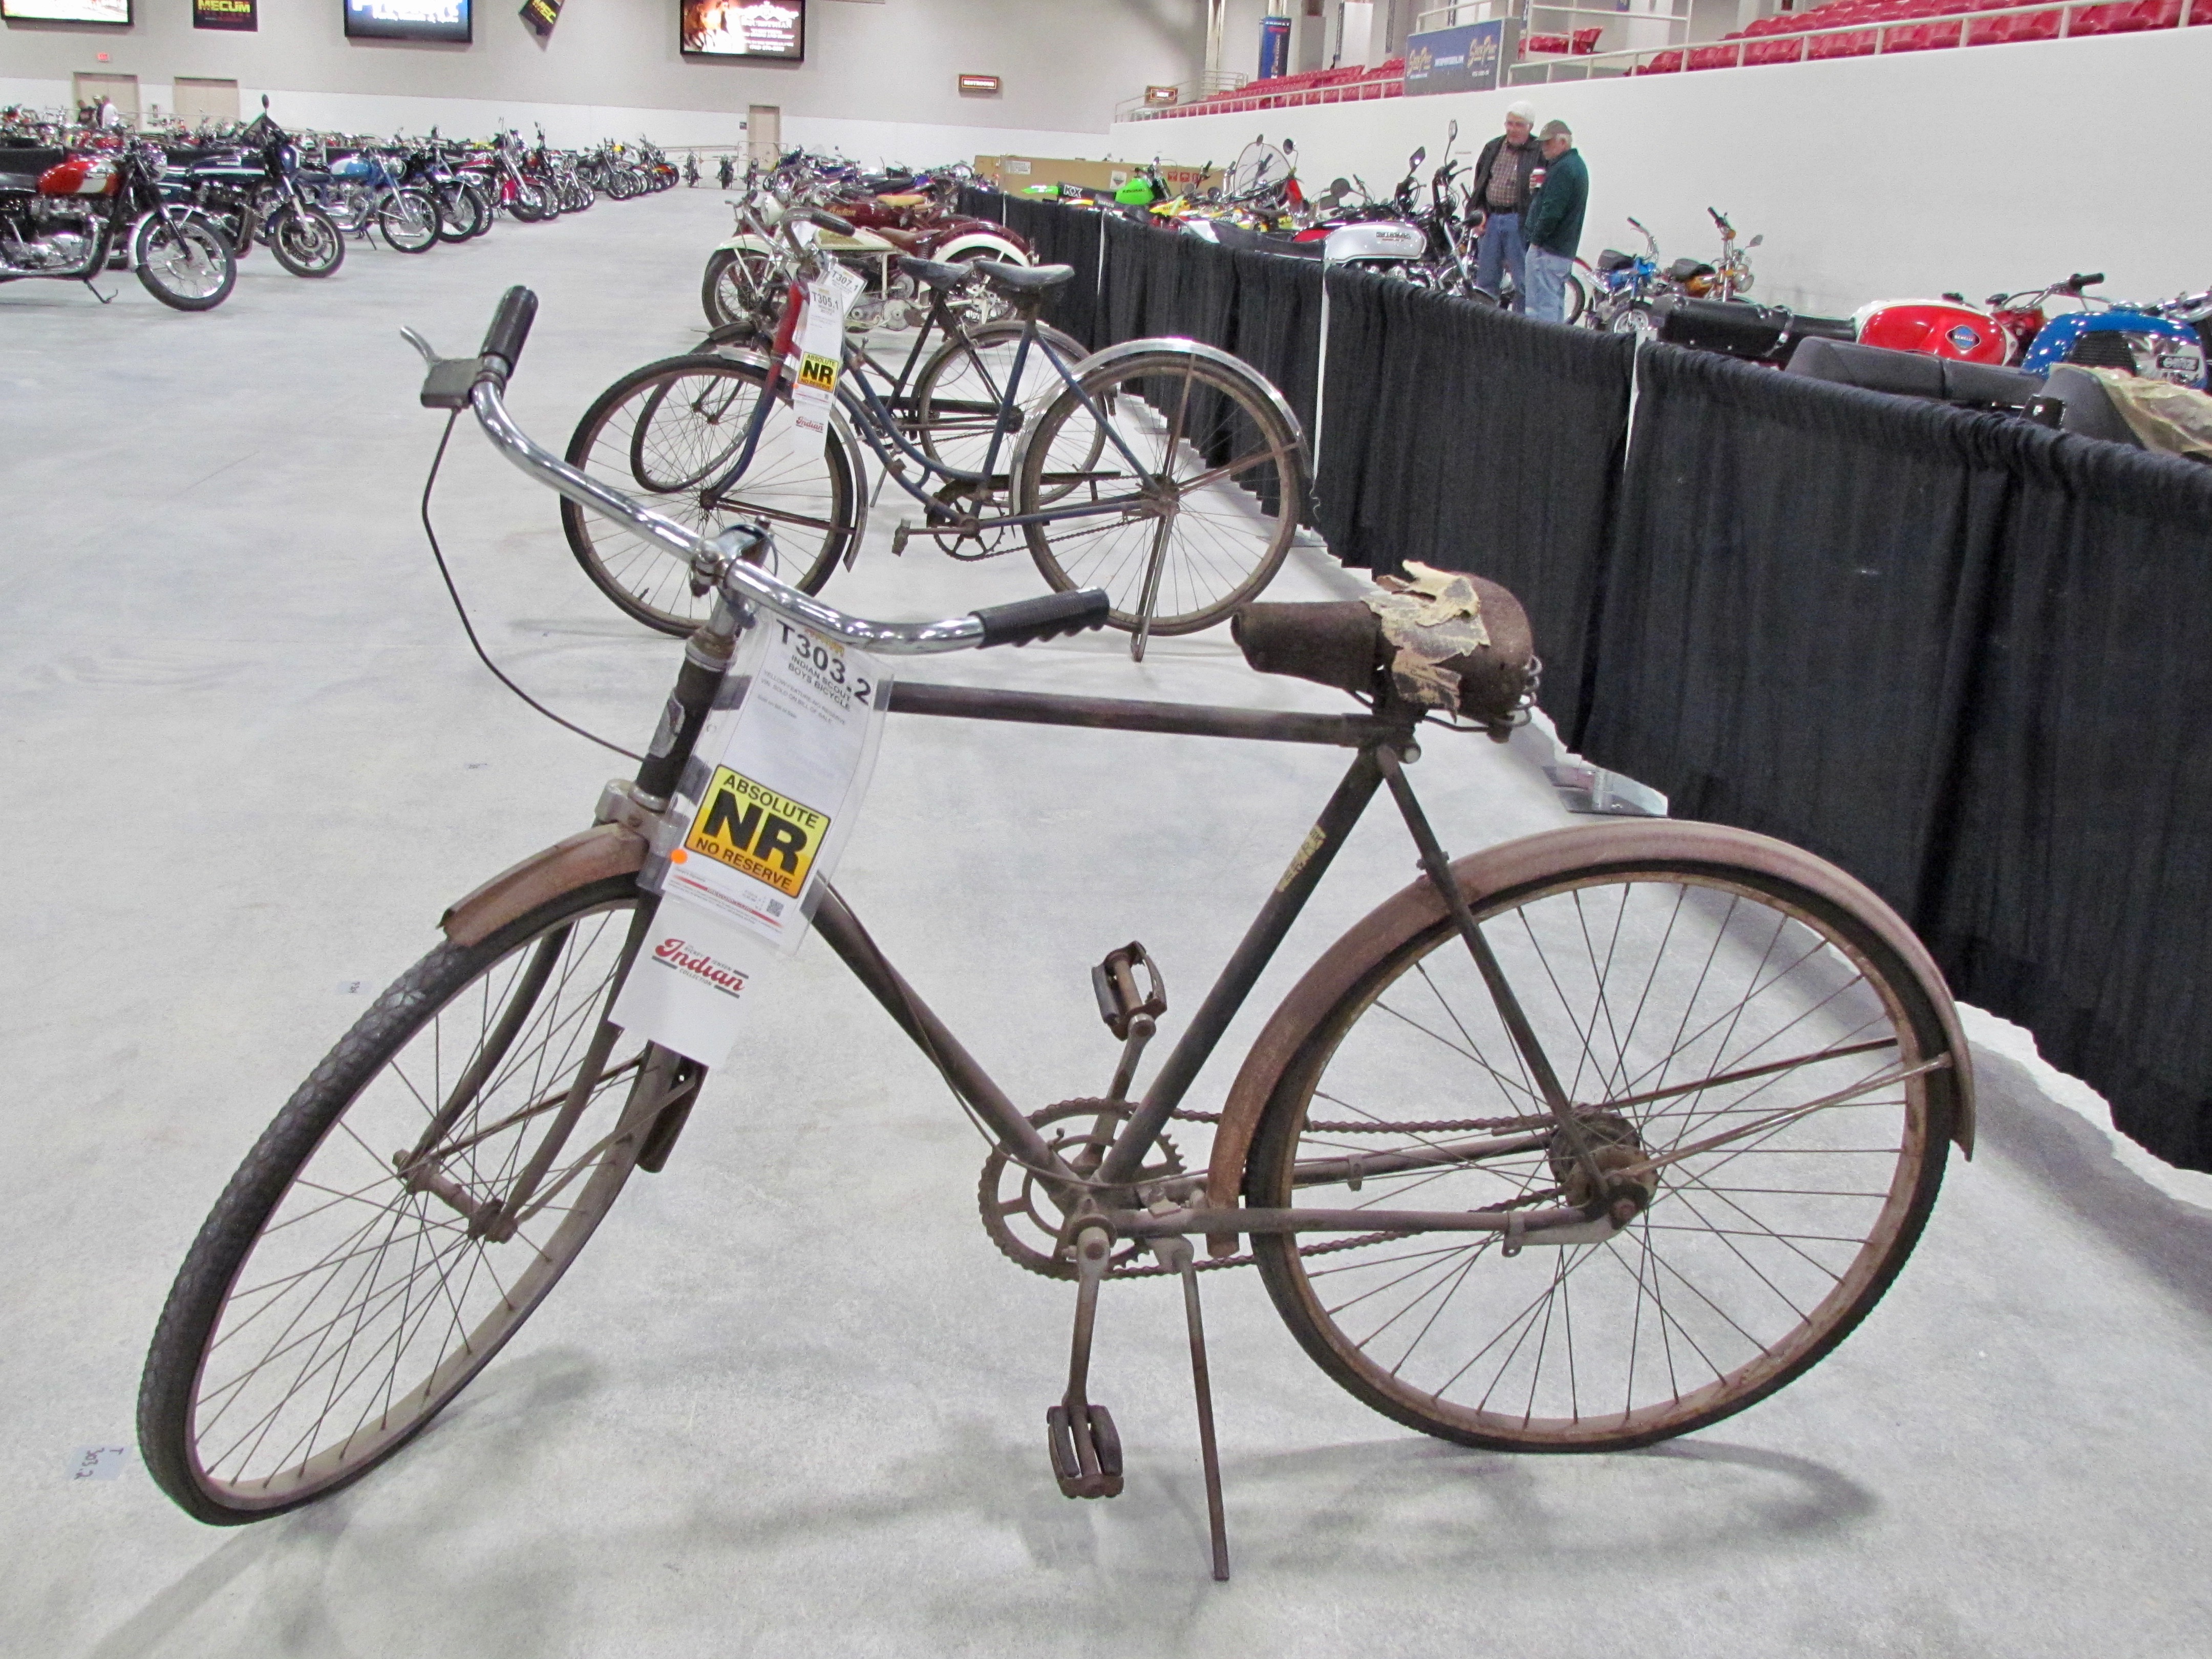 Mecum, Barn-found trove of Indian motorcycles and materials goes to auction, ClassicCars.com Journal